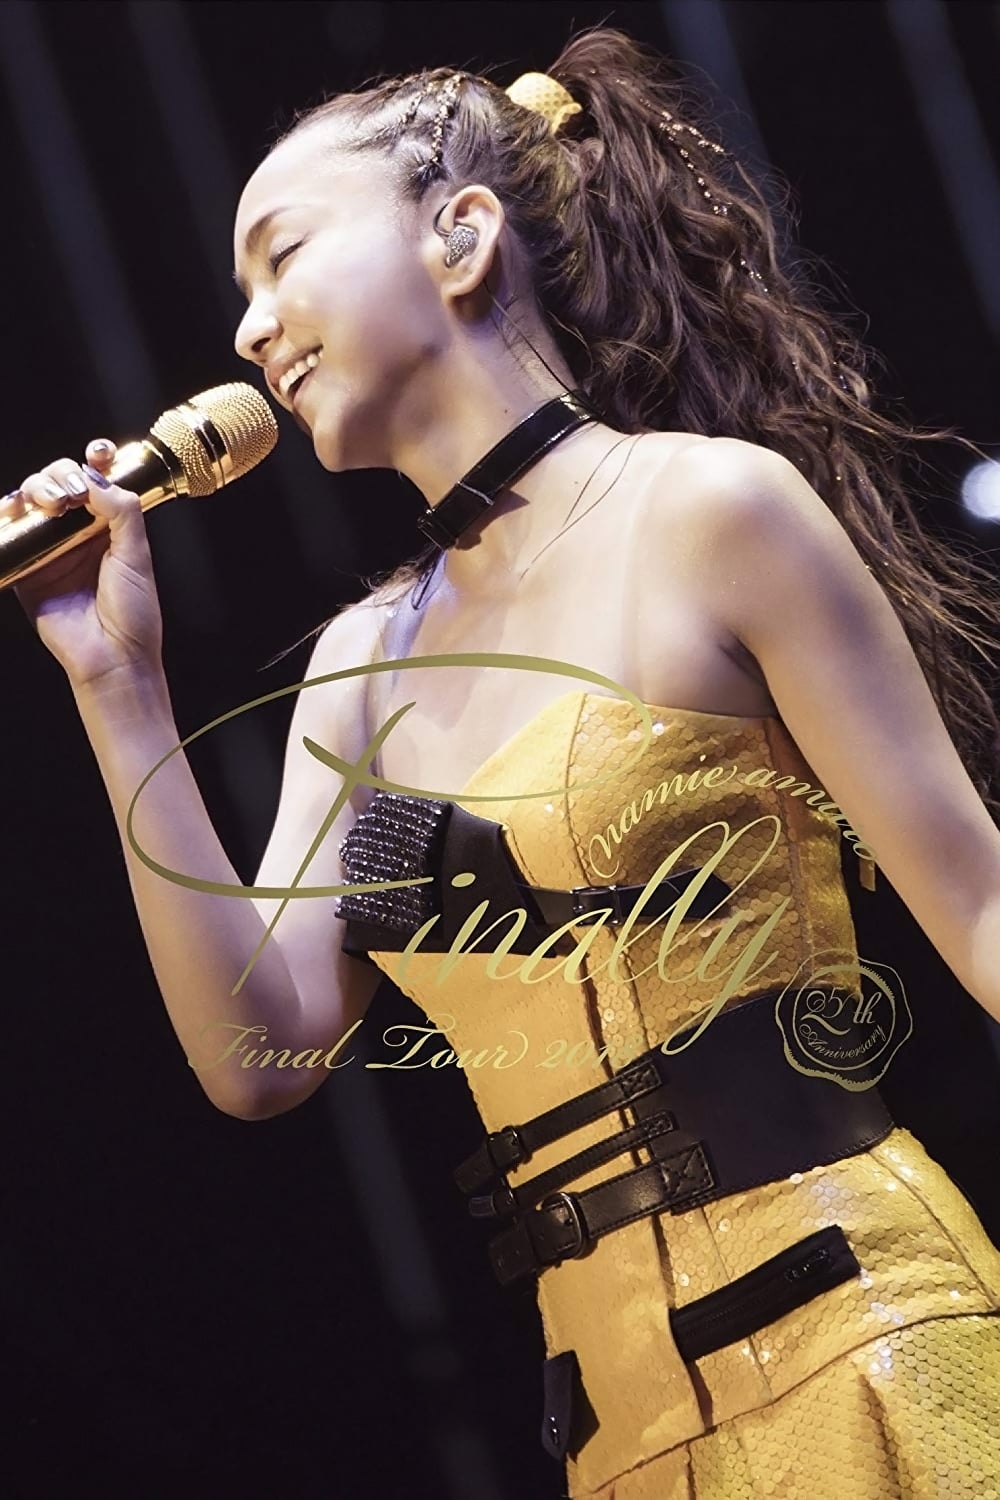 Namie Amuro Final Tour 18 Finally At Sapporo Dome 18 Movie Where To Watch Streaming Online Plot